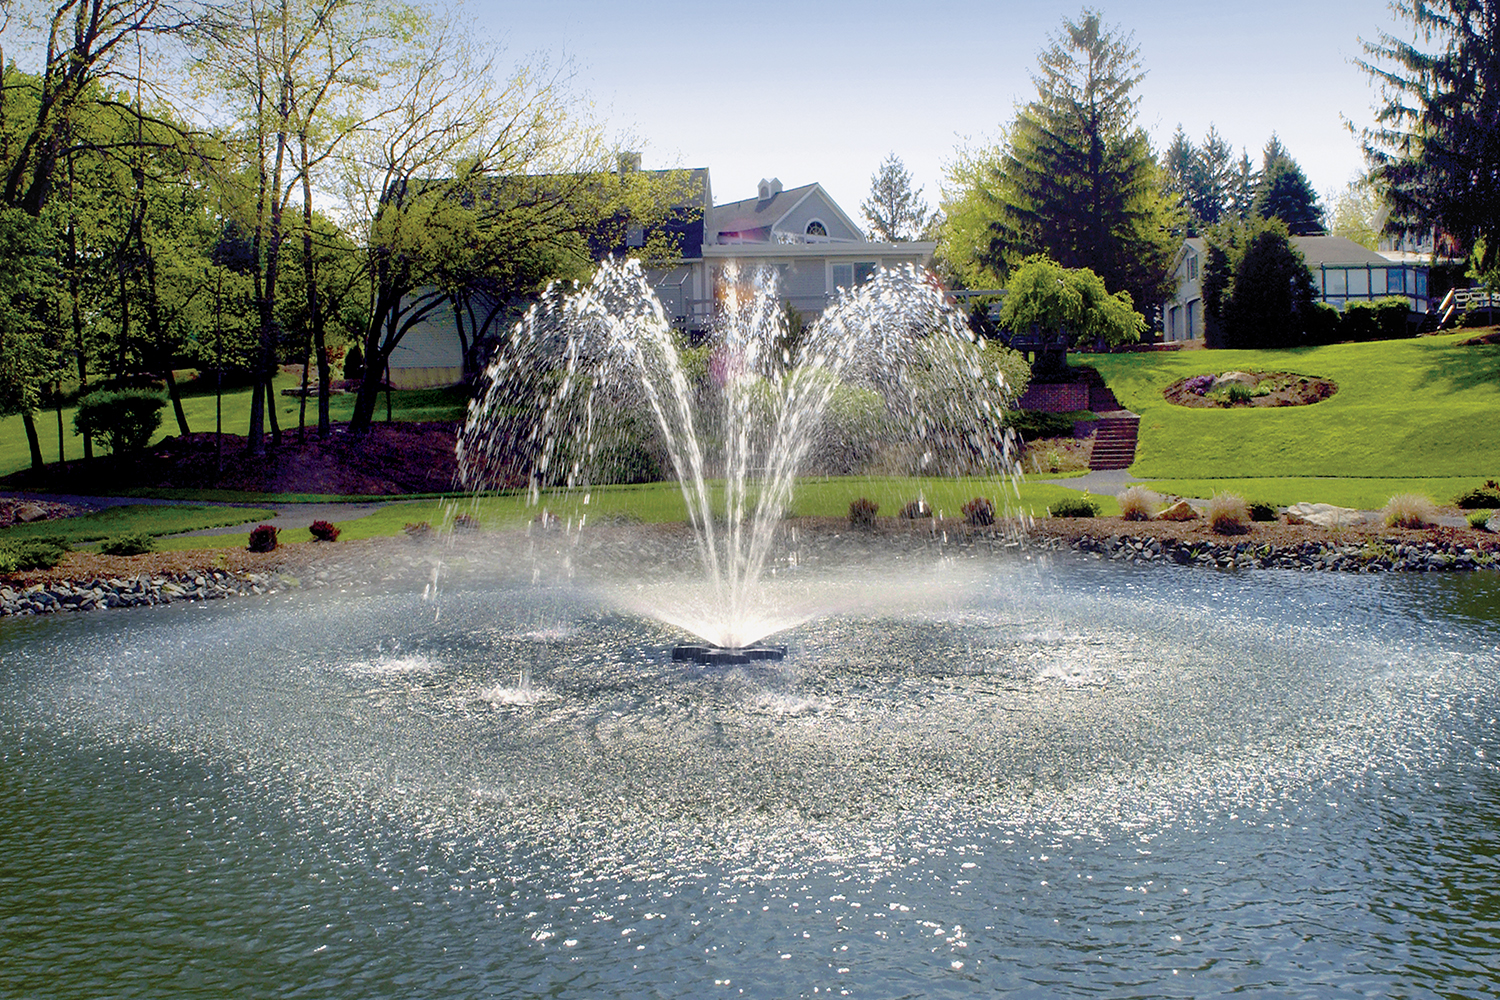 One of Otterbine's Constellation Two-Tiered Water Fountain